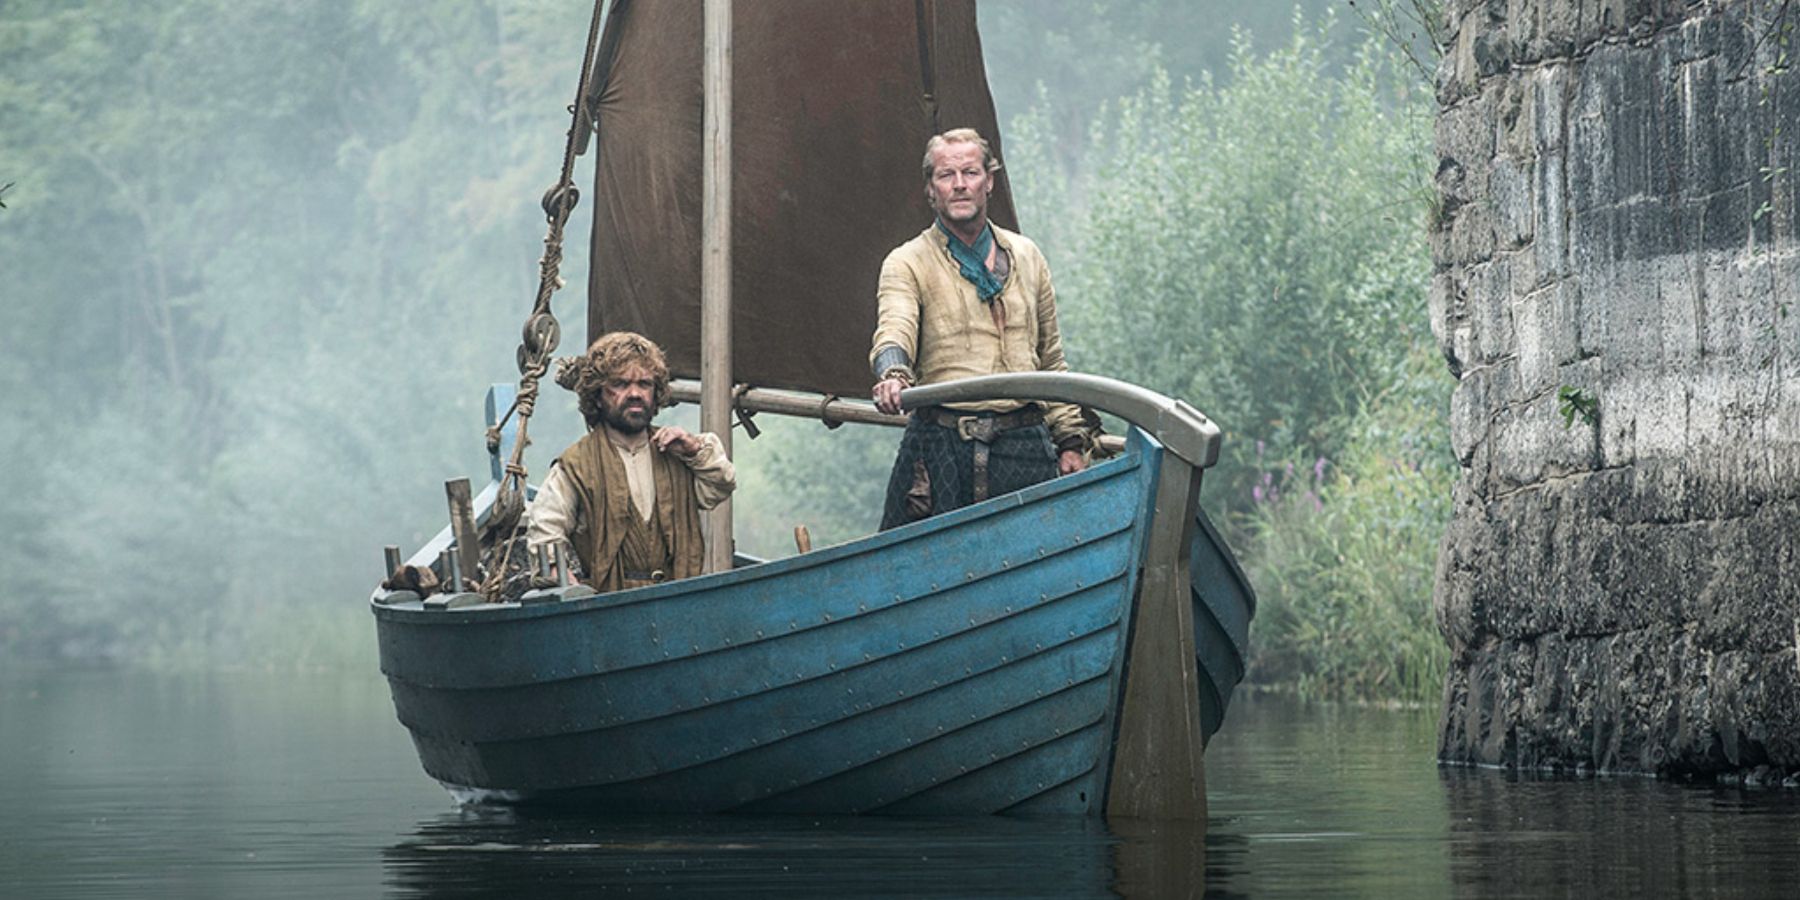 Tyrion Lannister and Ser Jorah sailing through the ruins of Valyria in Game of Thrones.